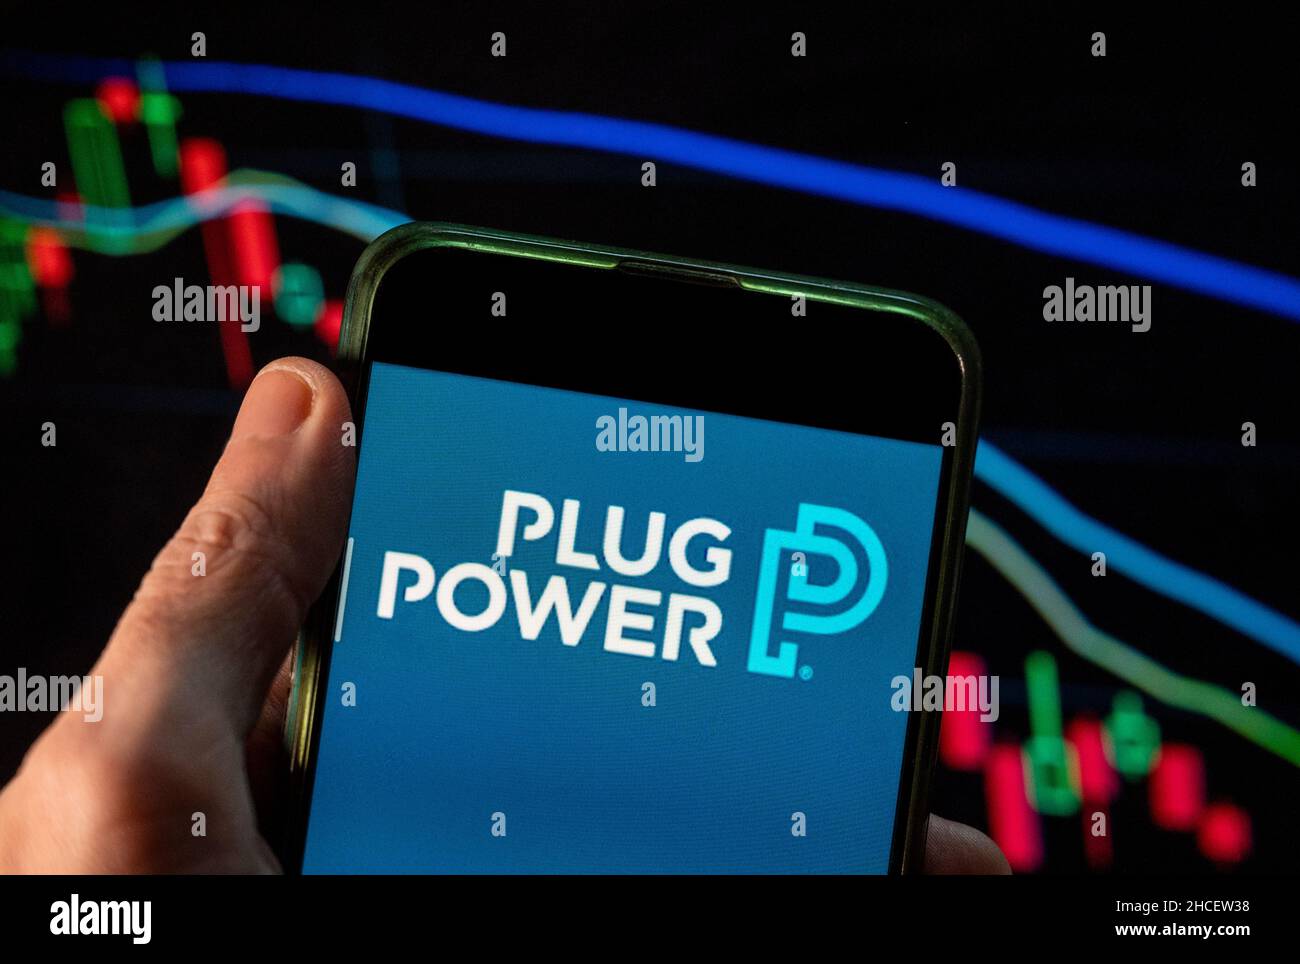 In this photo illustration the American company engaged in the development of hydrogen fuel cell systems that replace conventional batteries in equipment, Power Plug, logo seen displayed on a smartphone with an economic stock exchange index graph in the background. Stock Photo